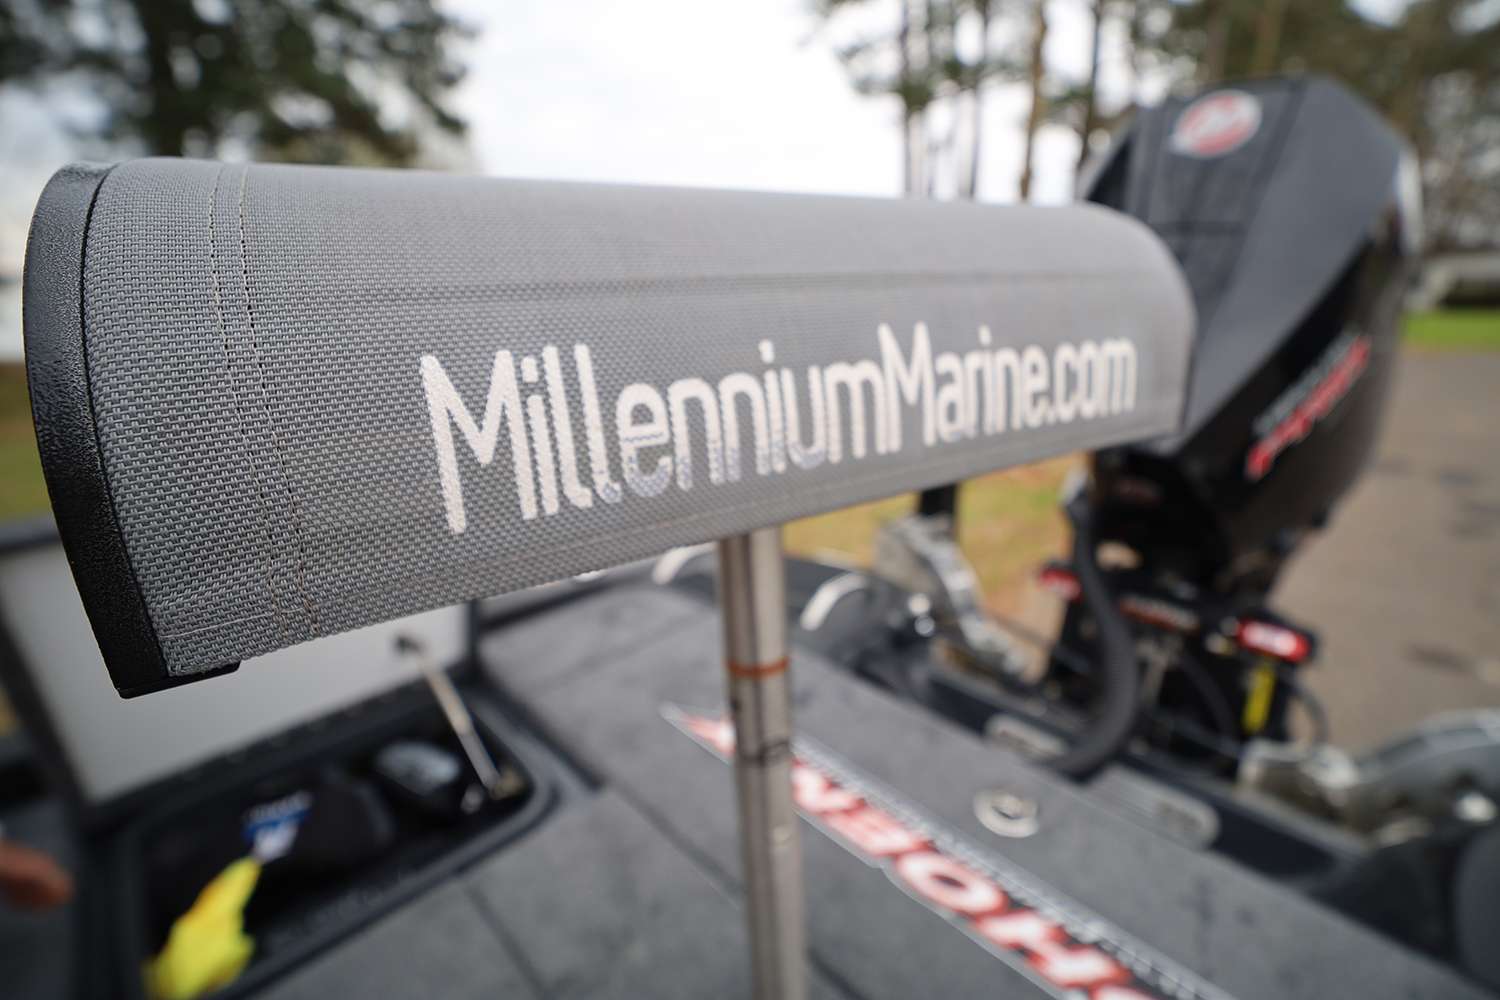 A seat pedestal from Millennium Marine, a seat he said is the most comfortable seat he's ever used on a boat.  